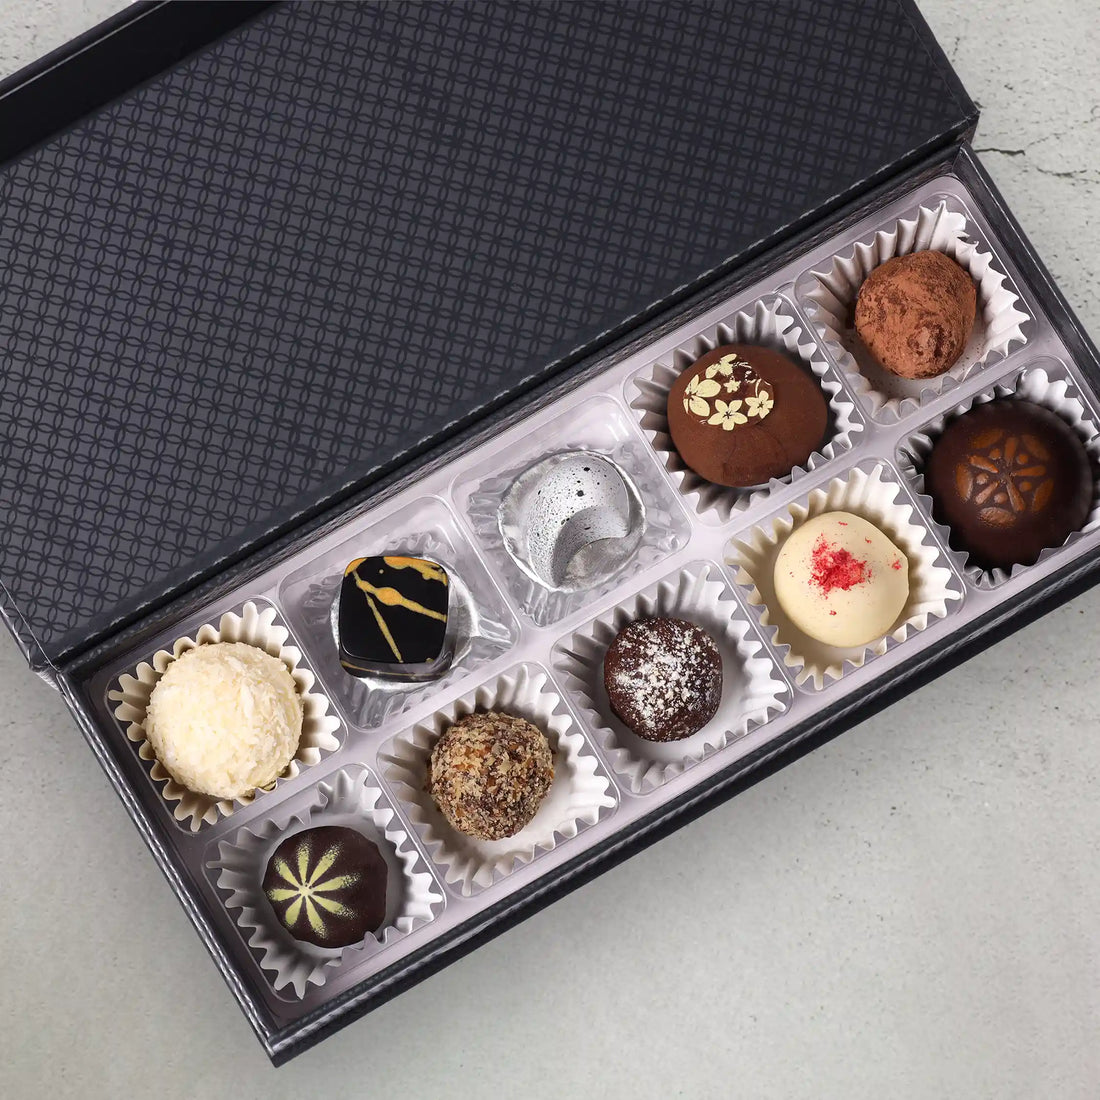 10 truffles and creamy chocolates part of the Velour Luxury Gift Box in front of a closed gift box